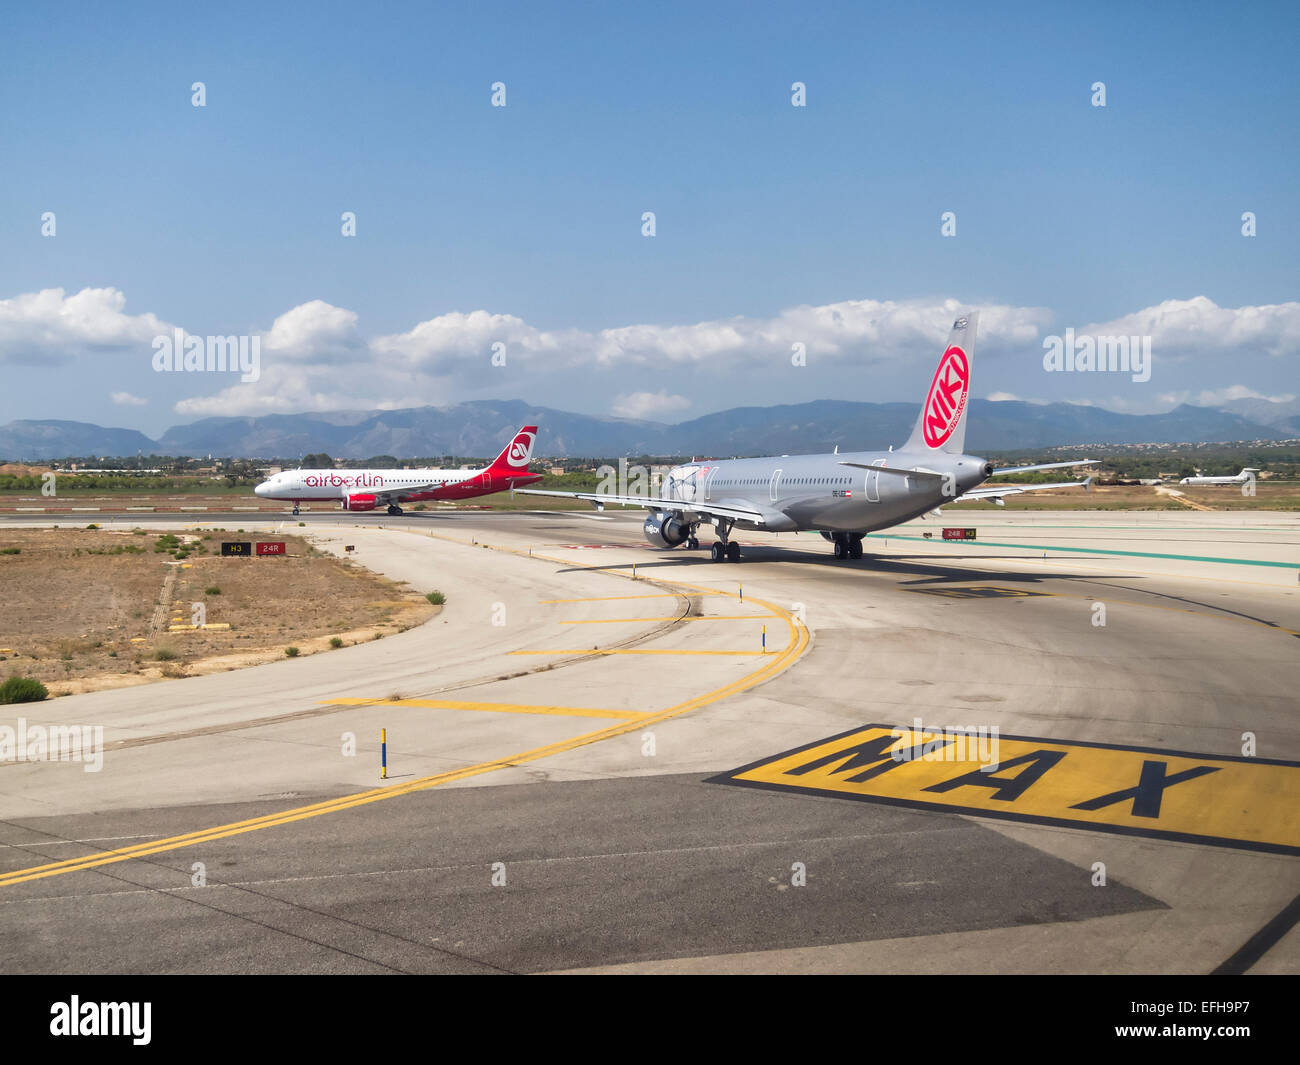 Planes lined up in the taxiway waiting to enter in the runway to takeoff Stock Photo